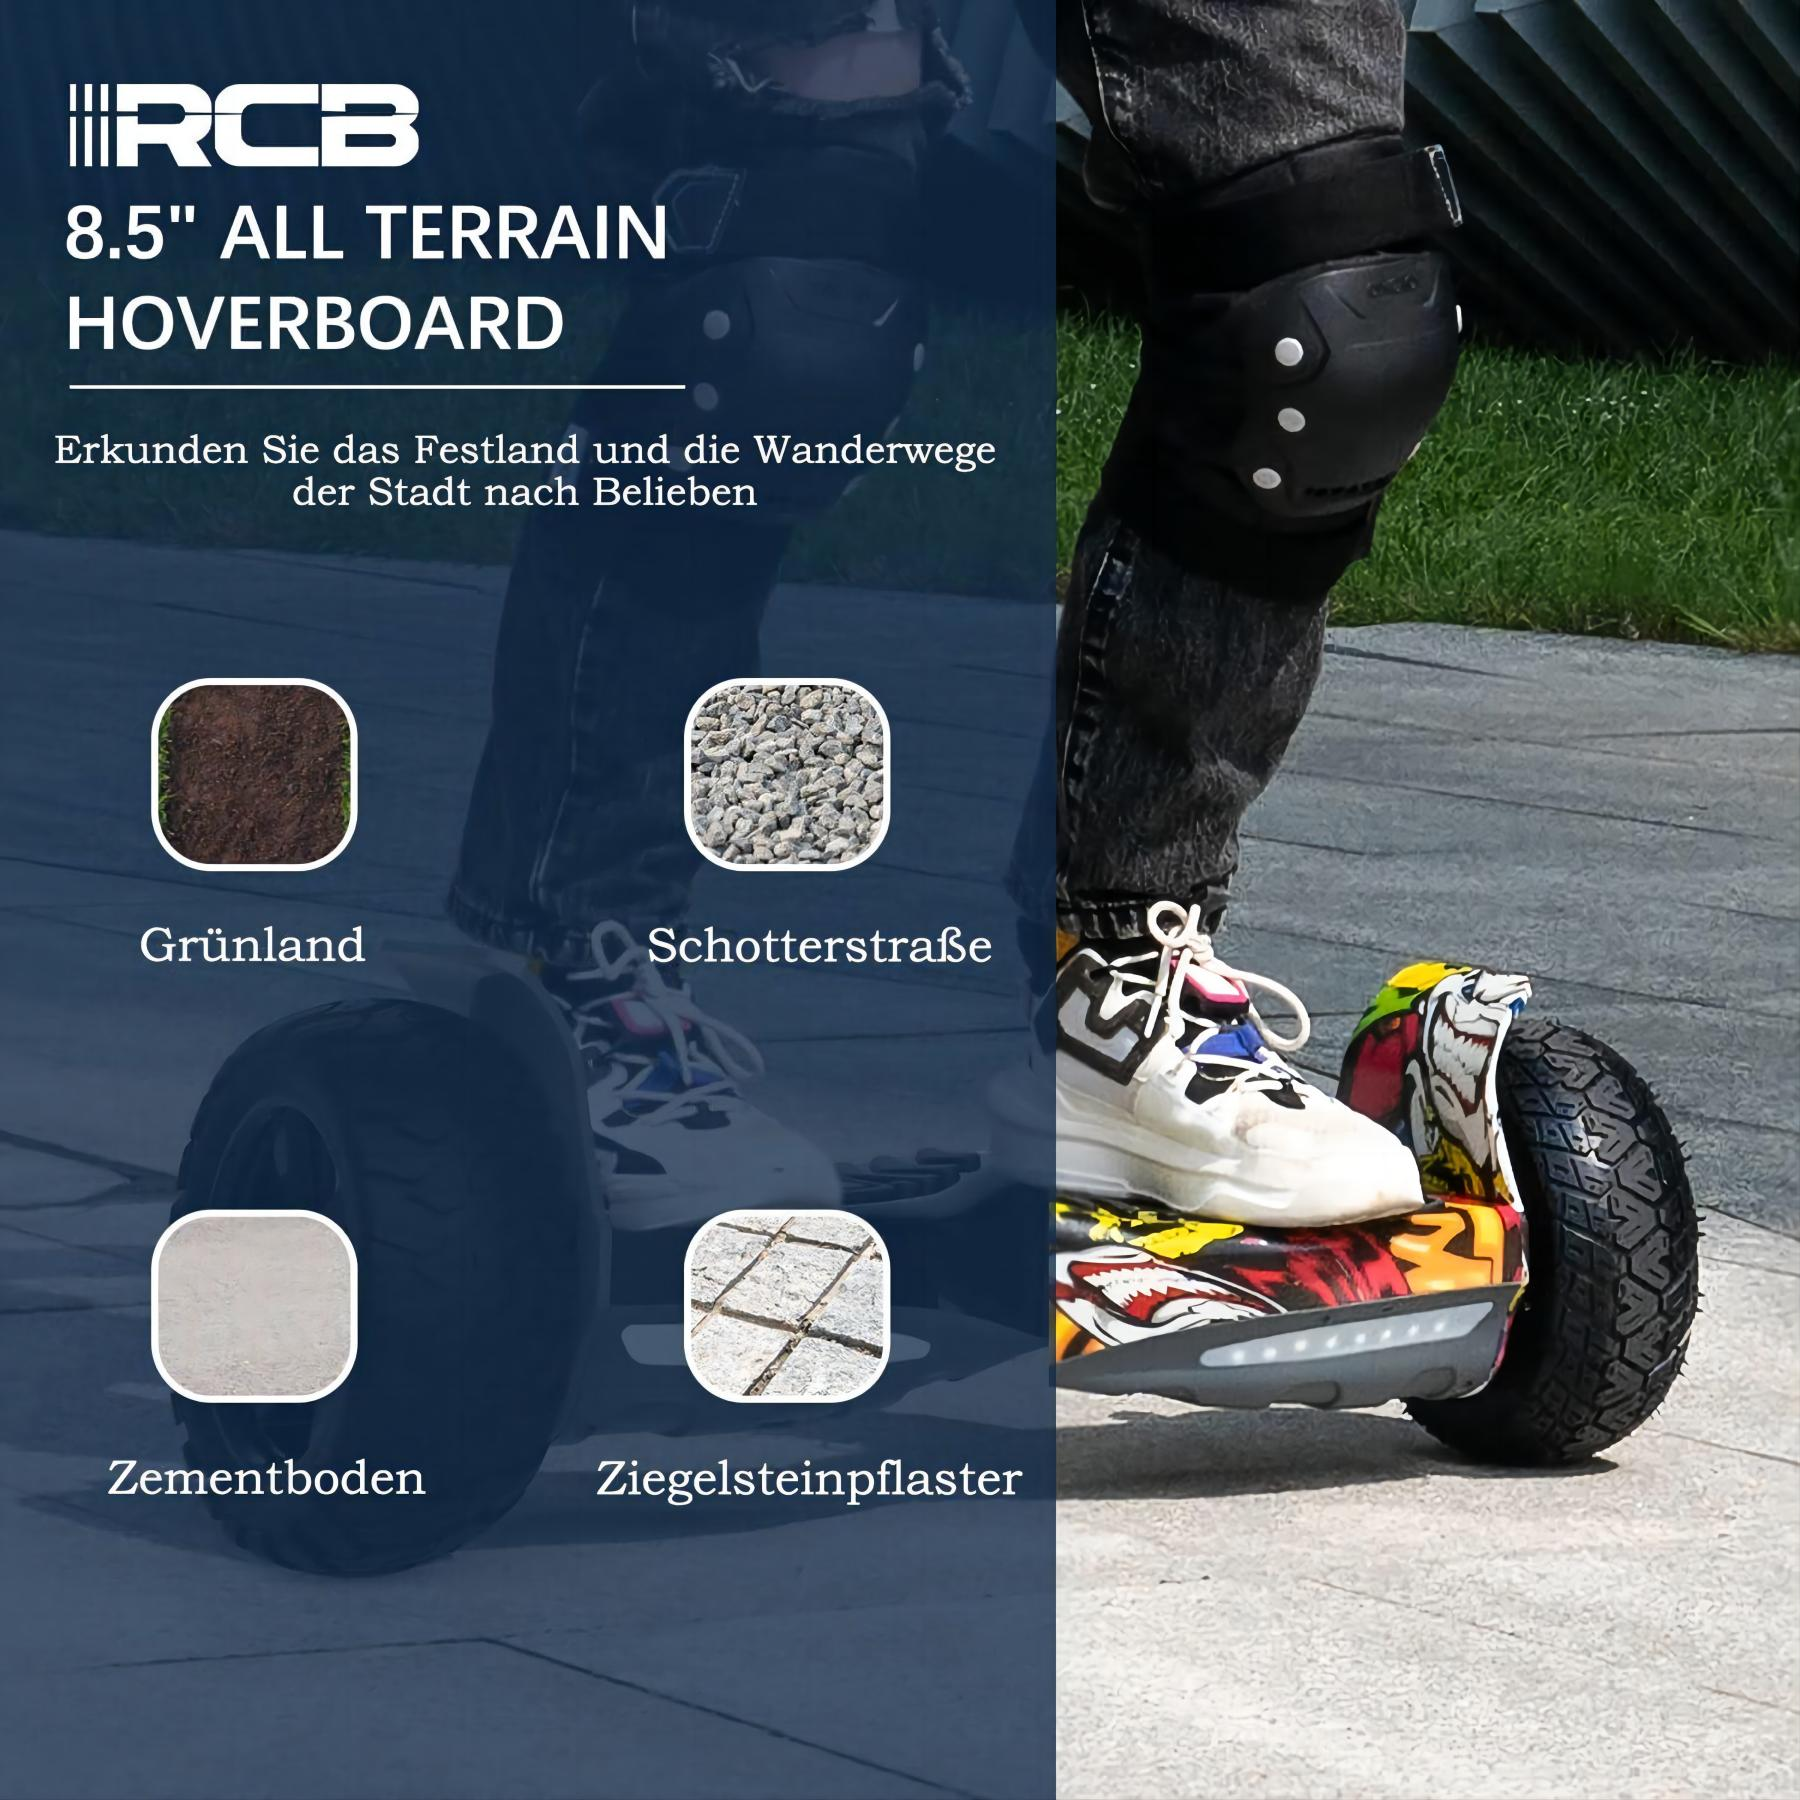 HM2 mit Balance SUV-Hoverboard Hippop) Zoll, Board APP (8,5 RCB